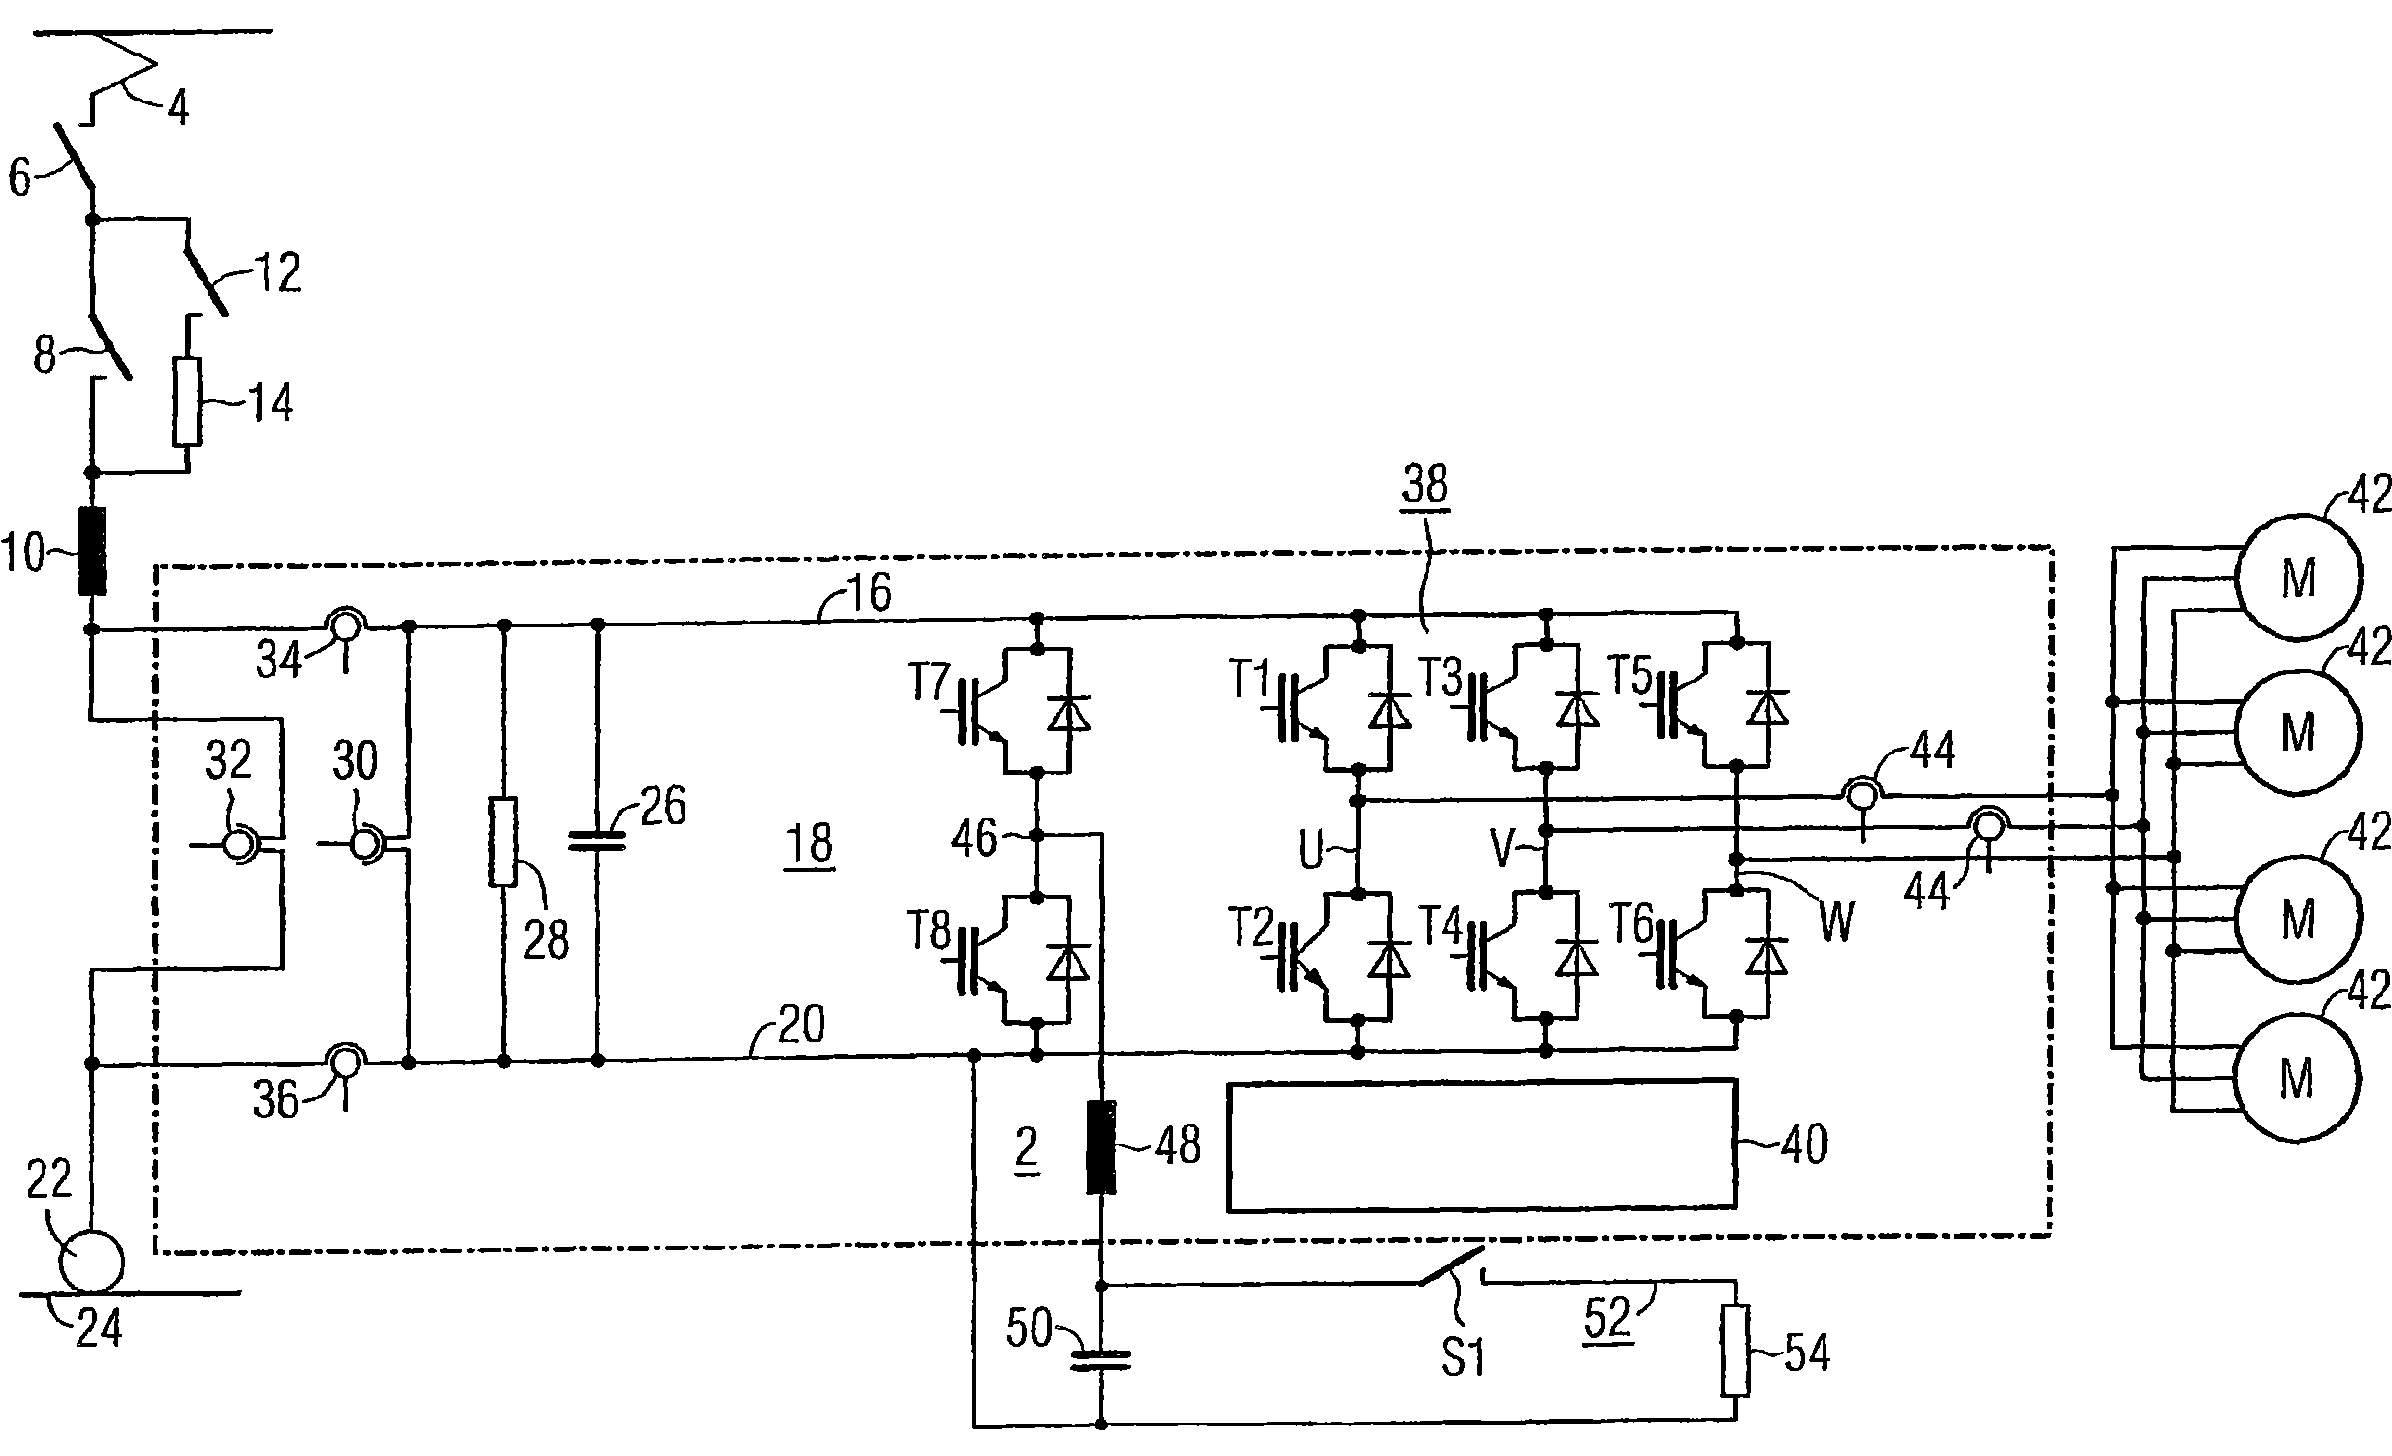 Surge limiter for a traction power converter